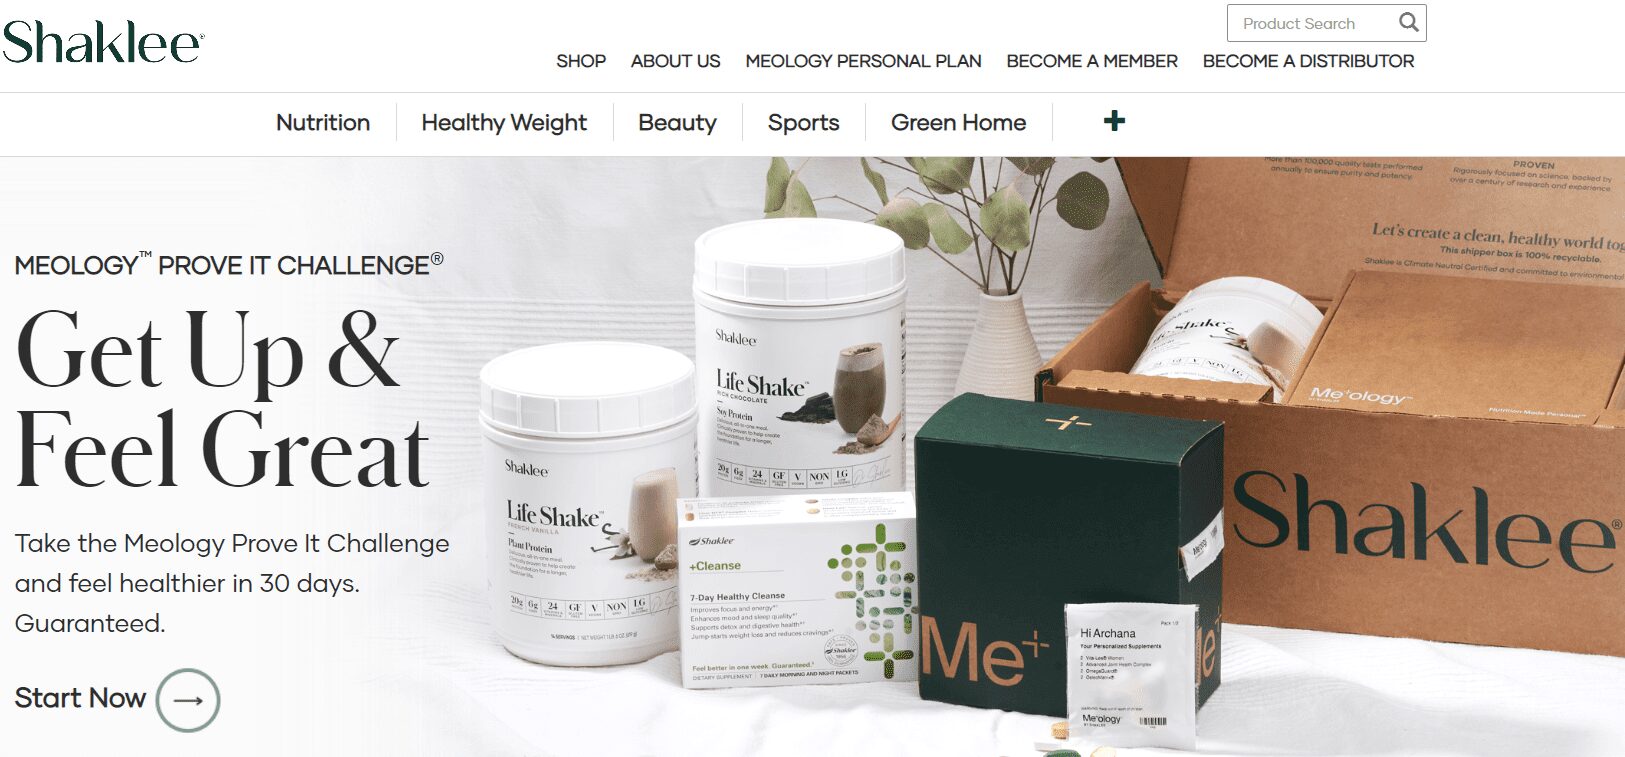 Shaklee Products login